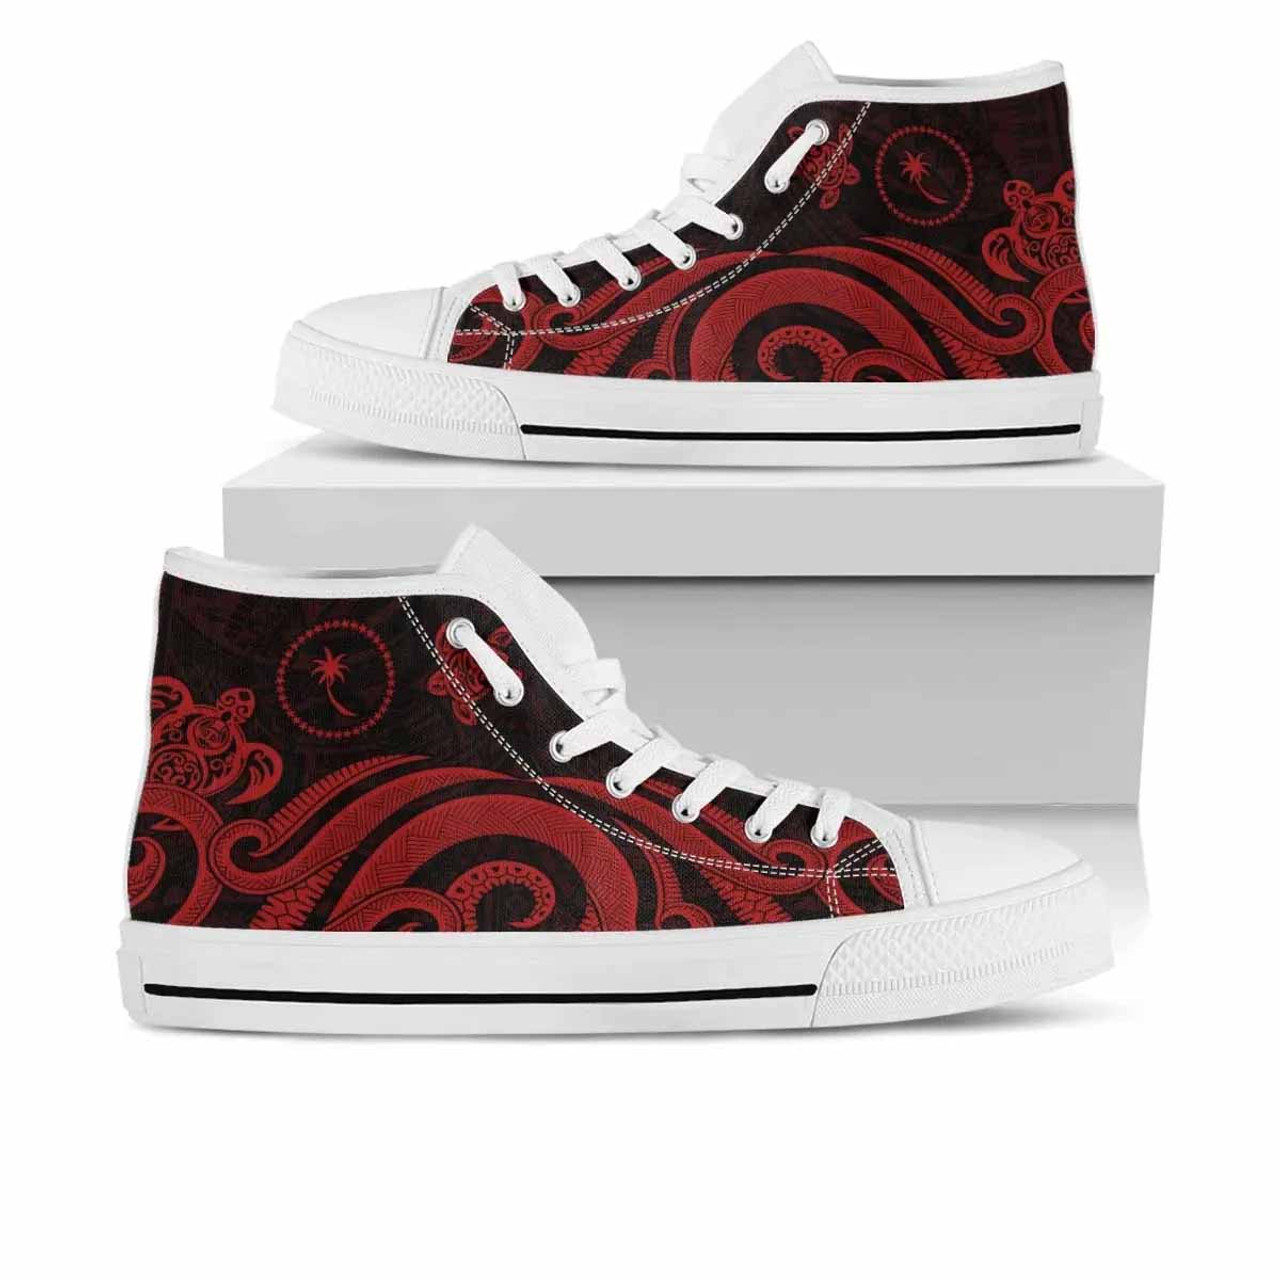 Chuuk High Top Shoes - Red Tentacle Turtle 10